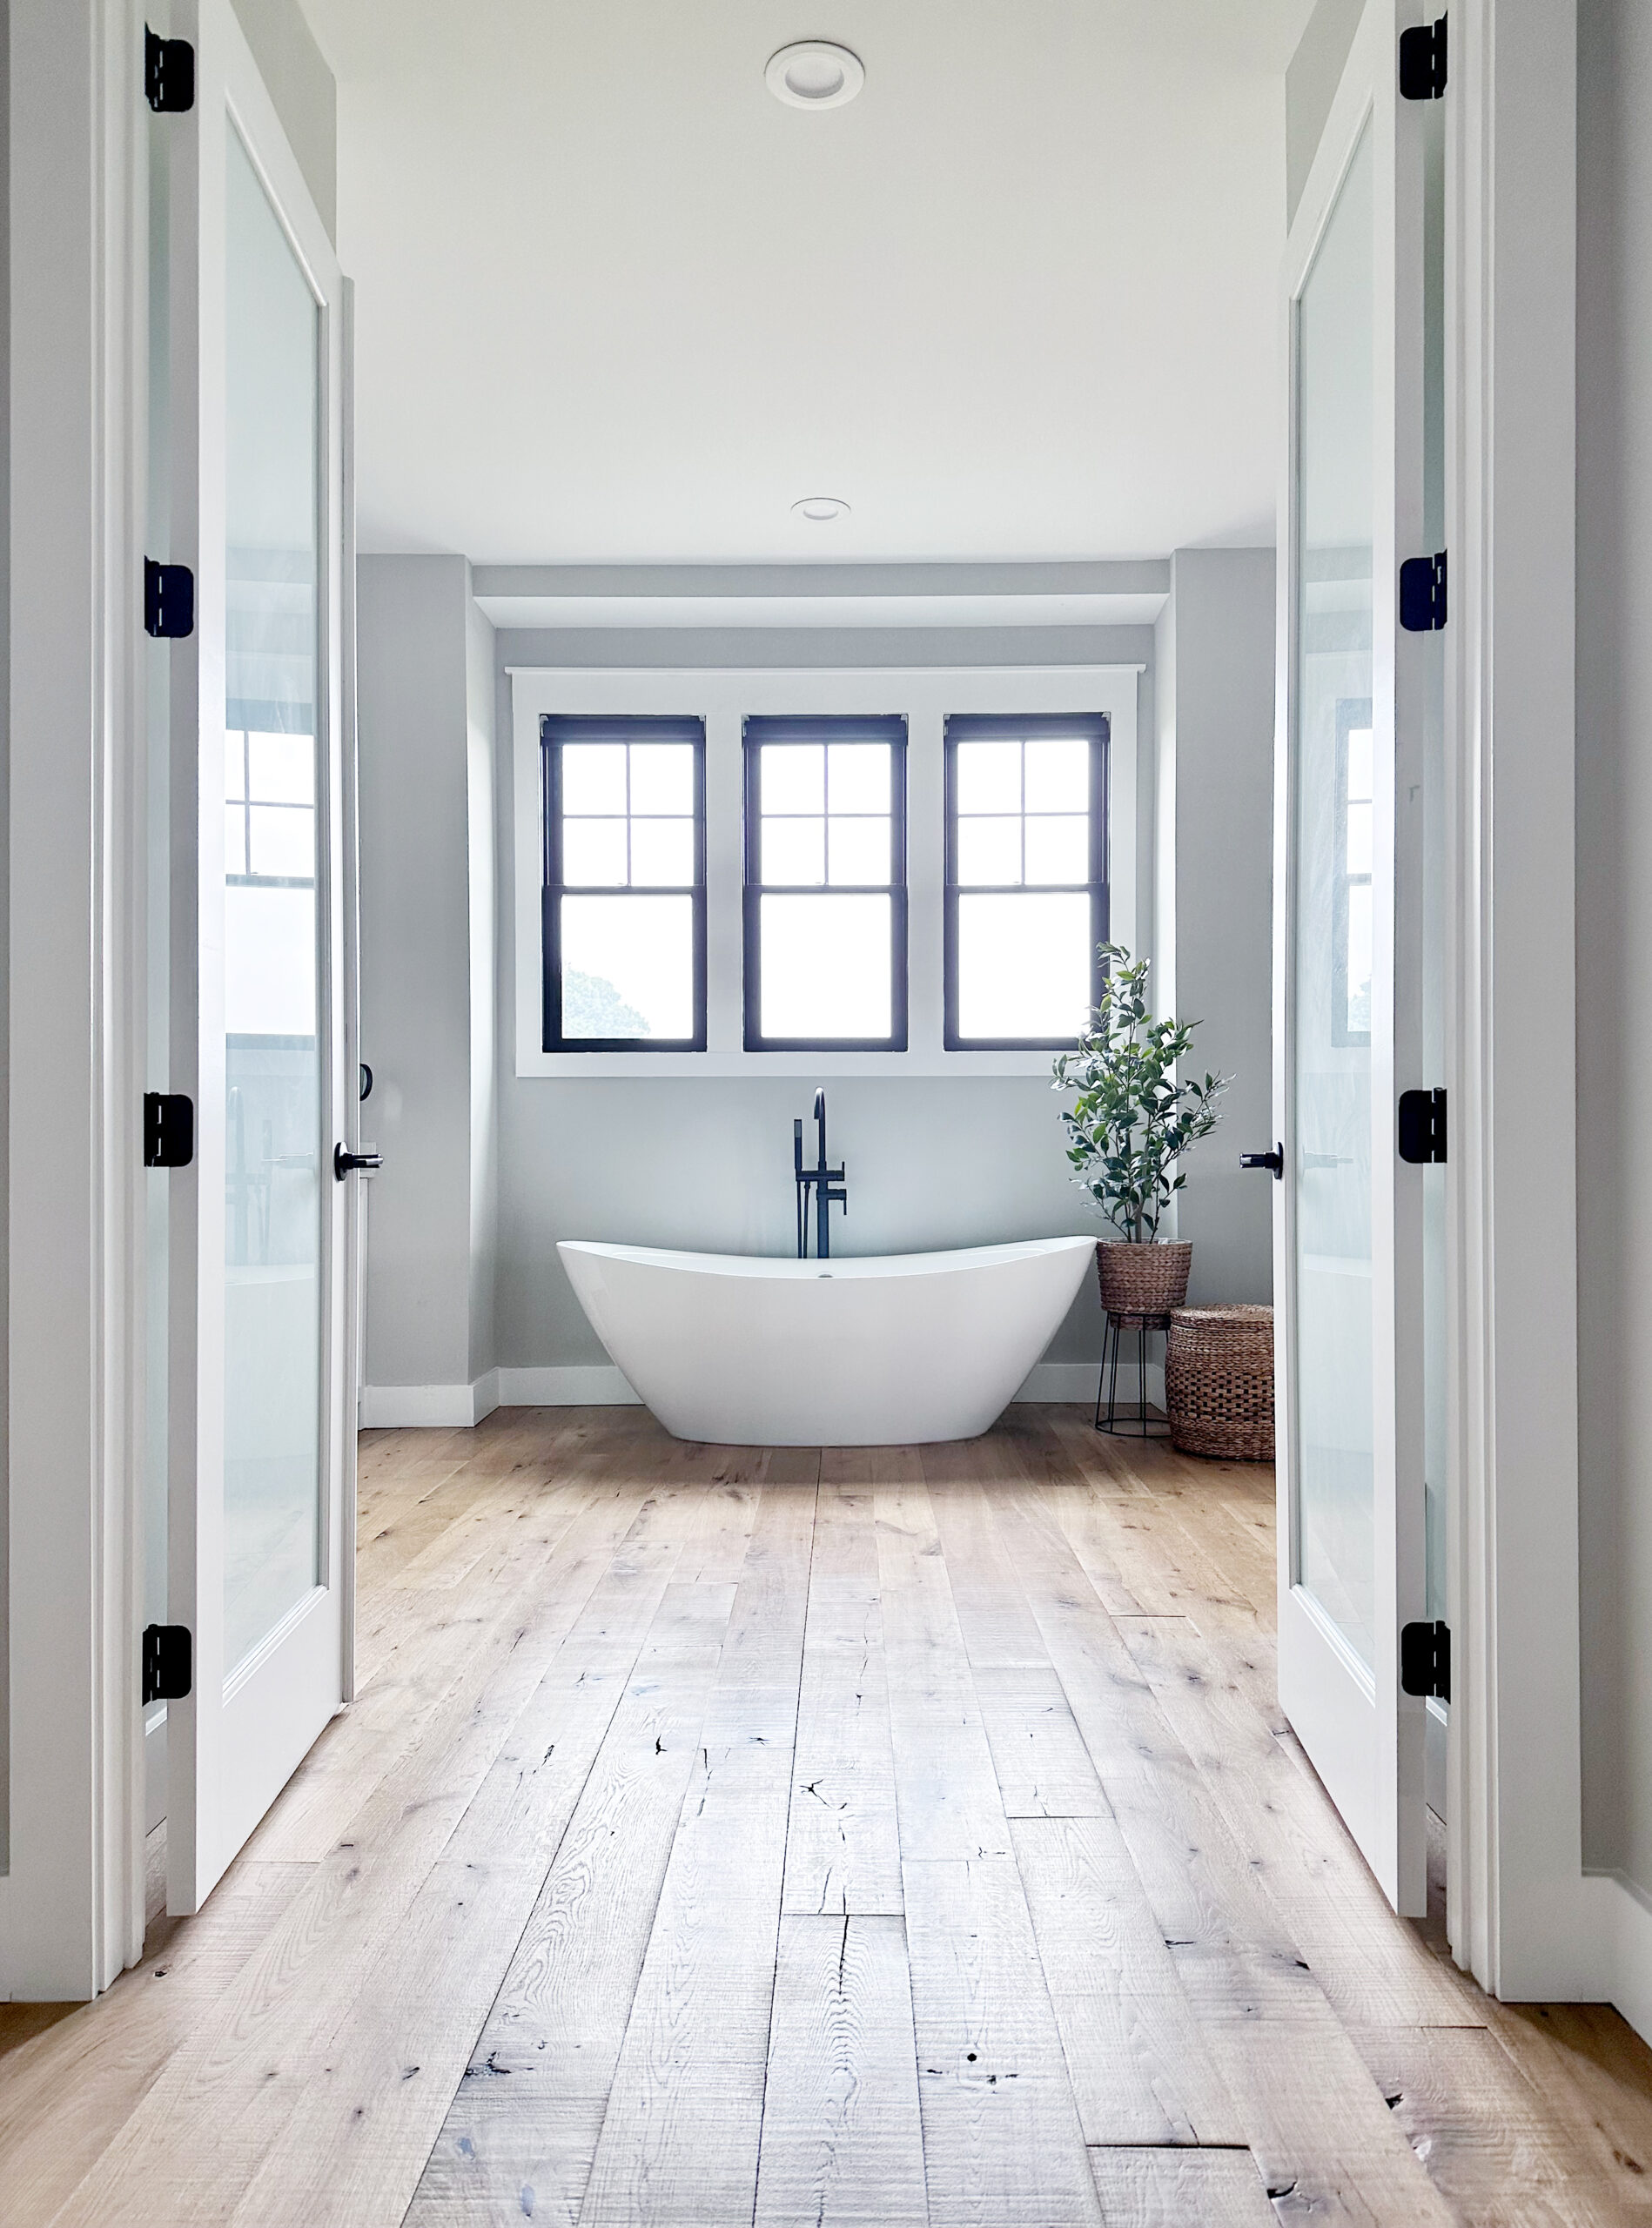 large entry into a master bathroom with a large standing tub under the windows